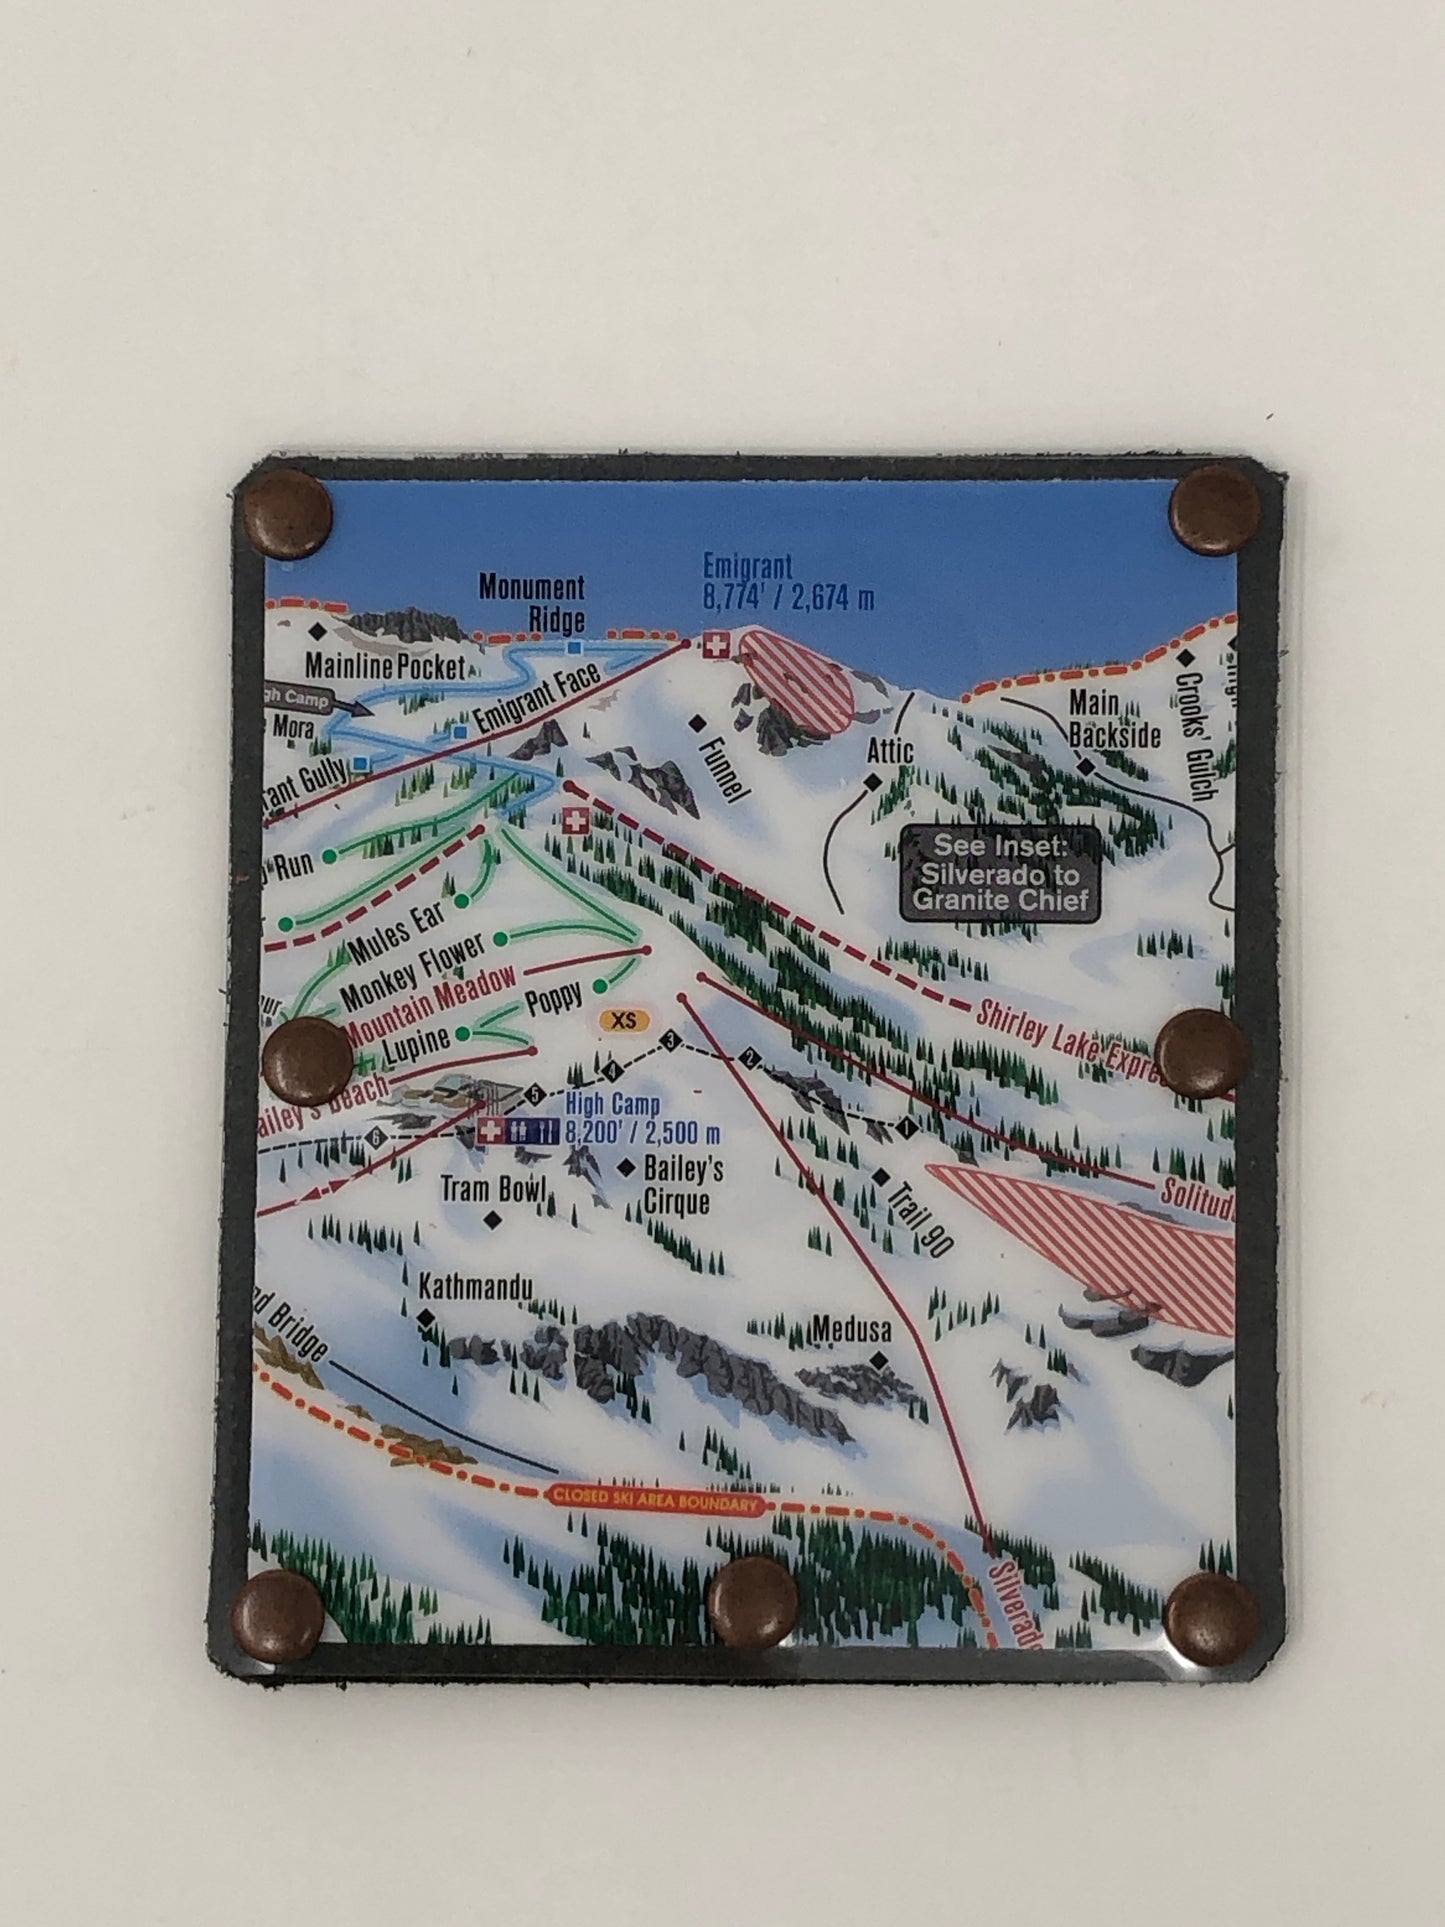 Let it Snow!!! Squaw Valley Monument Ridge Card Wallet